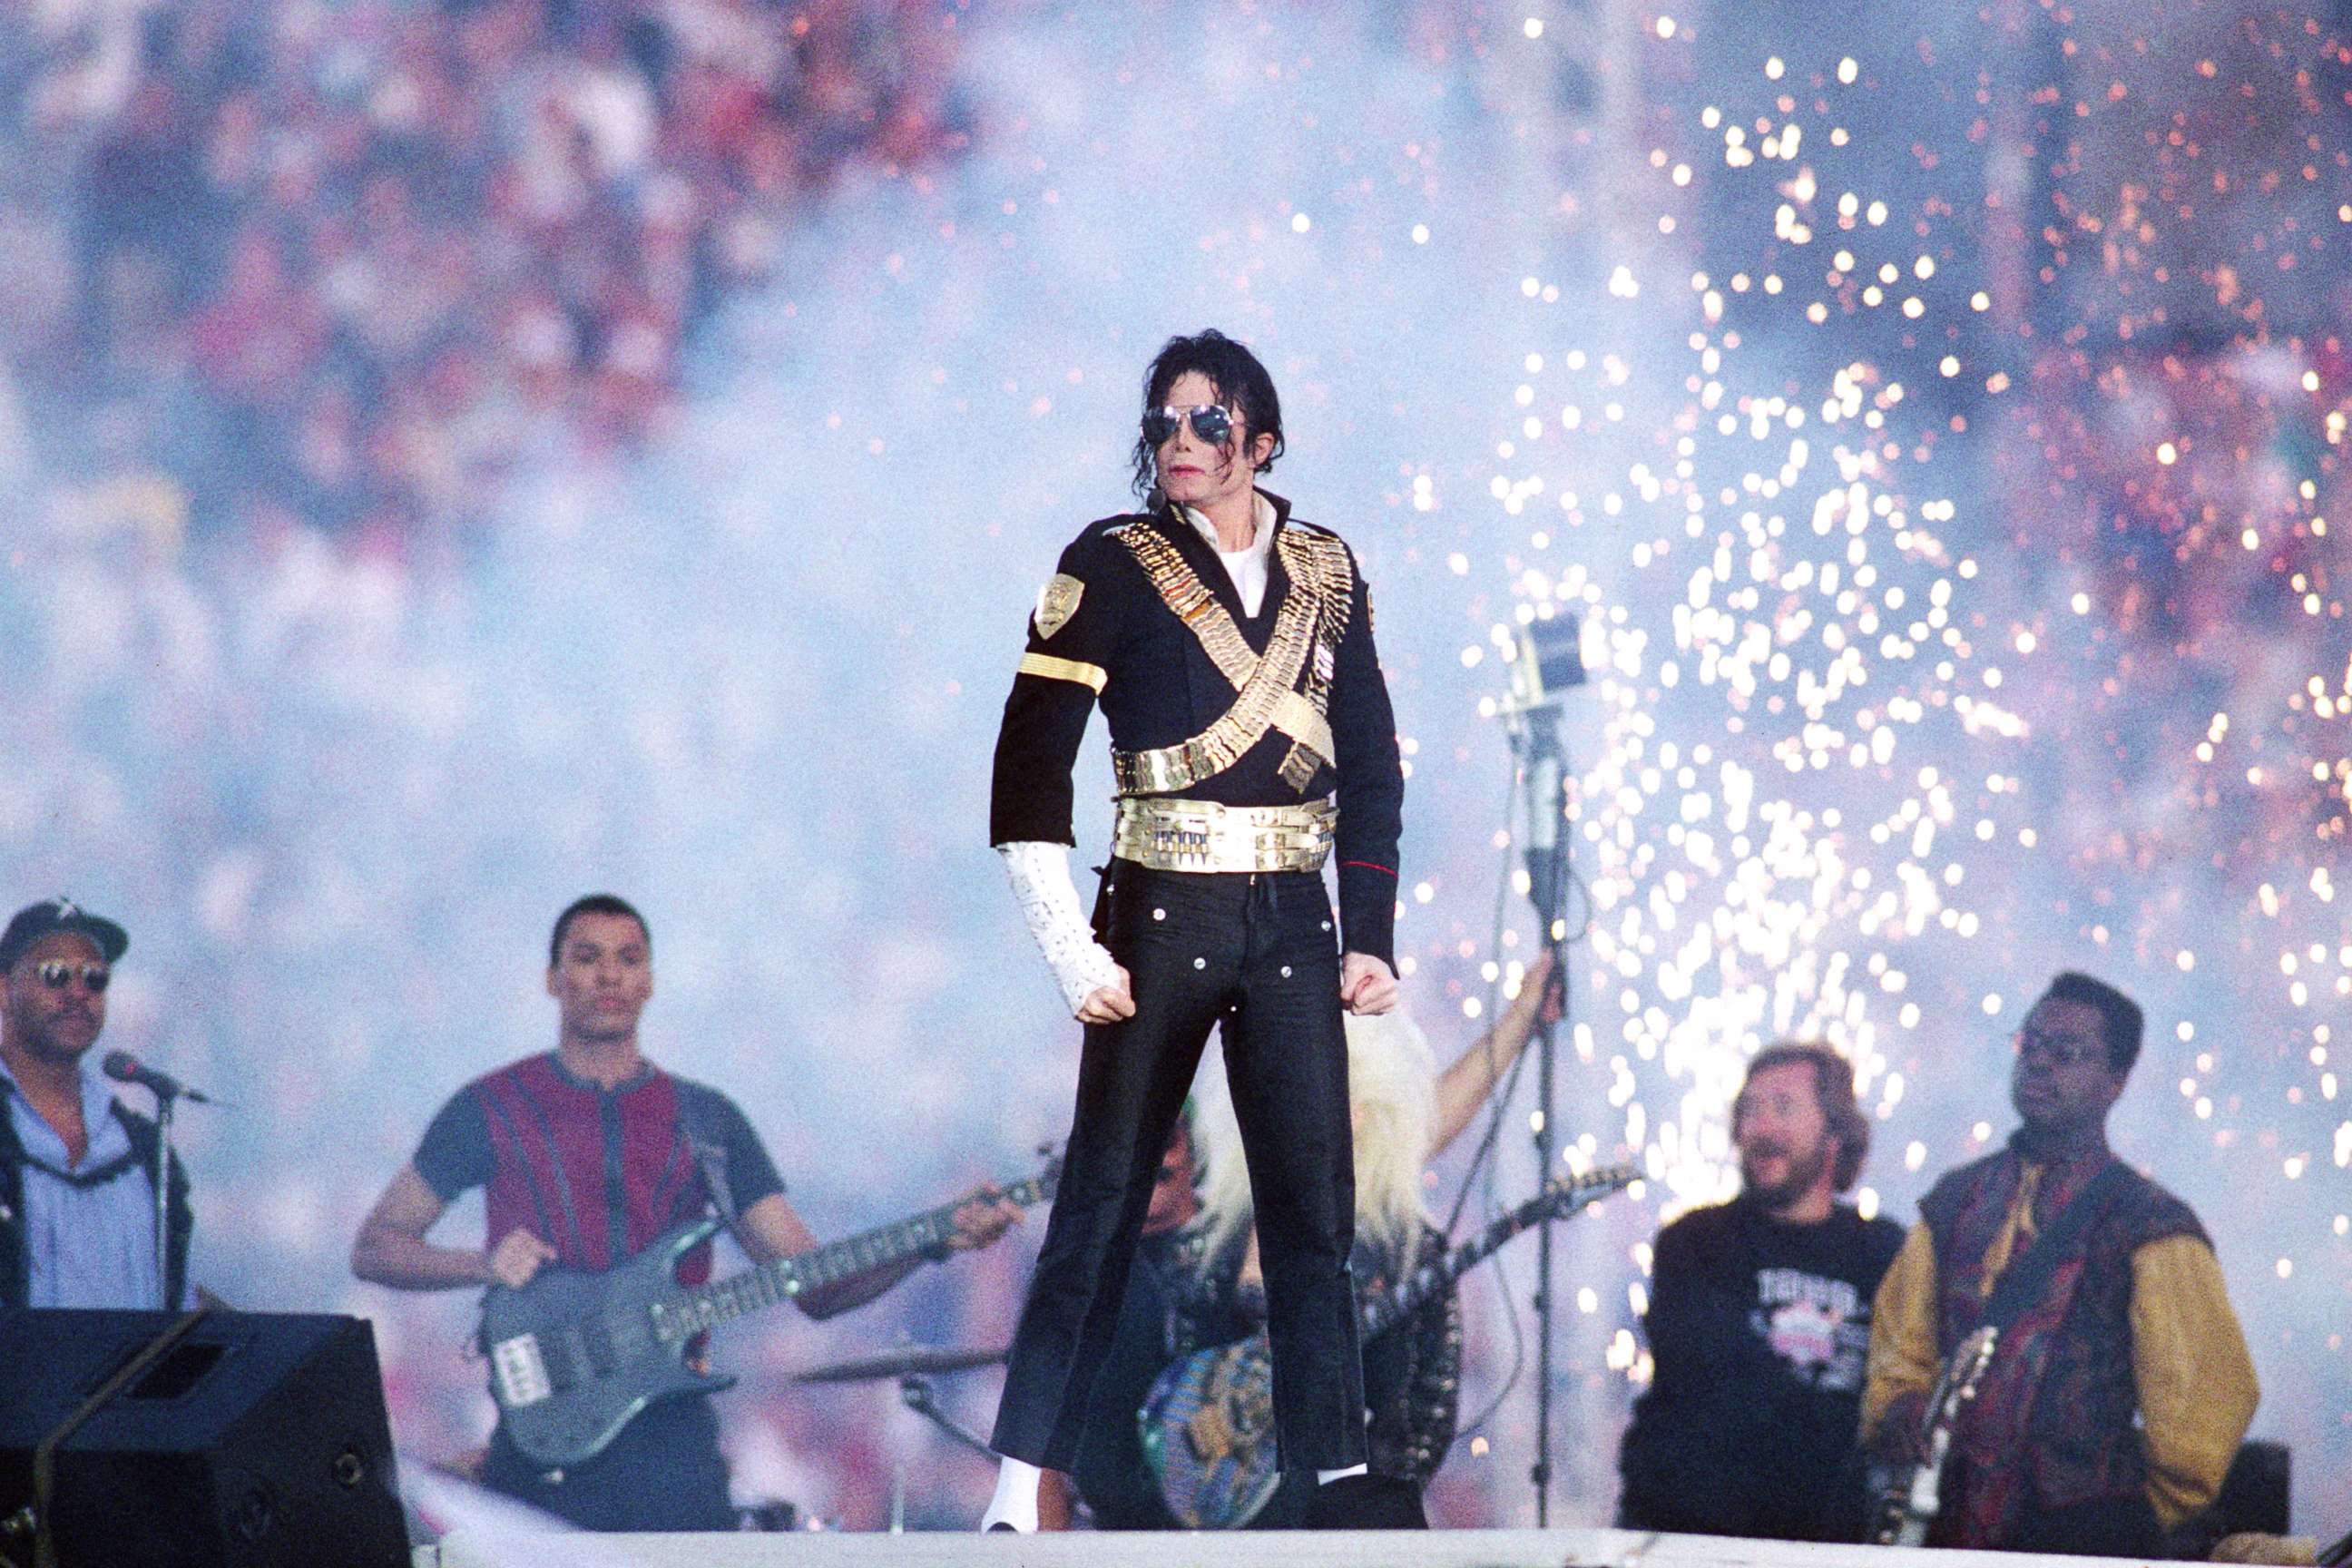 PHOTO: Michael Jackson performs during halftime at the Super Bowl XXVII on Jan. 31, 1993, at the Rose Bowl in Pasadena, Calif.